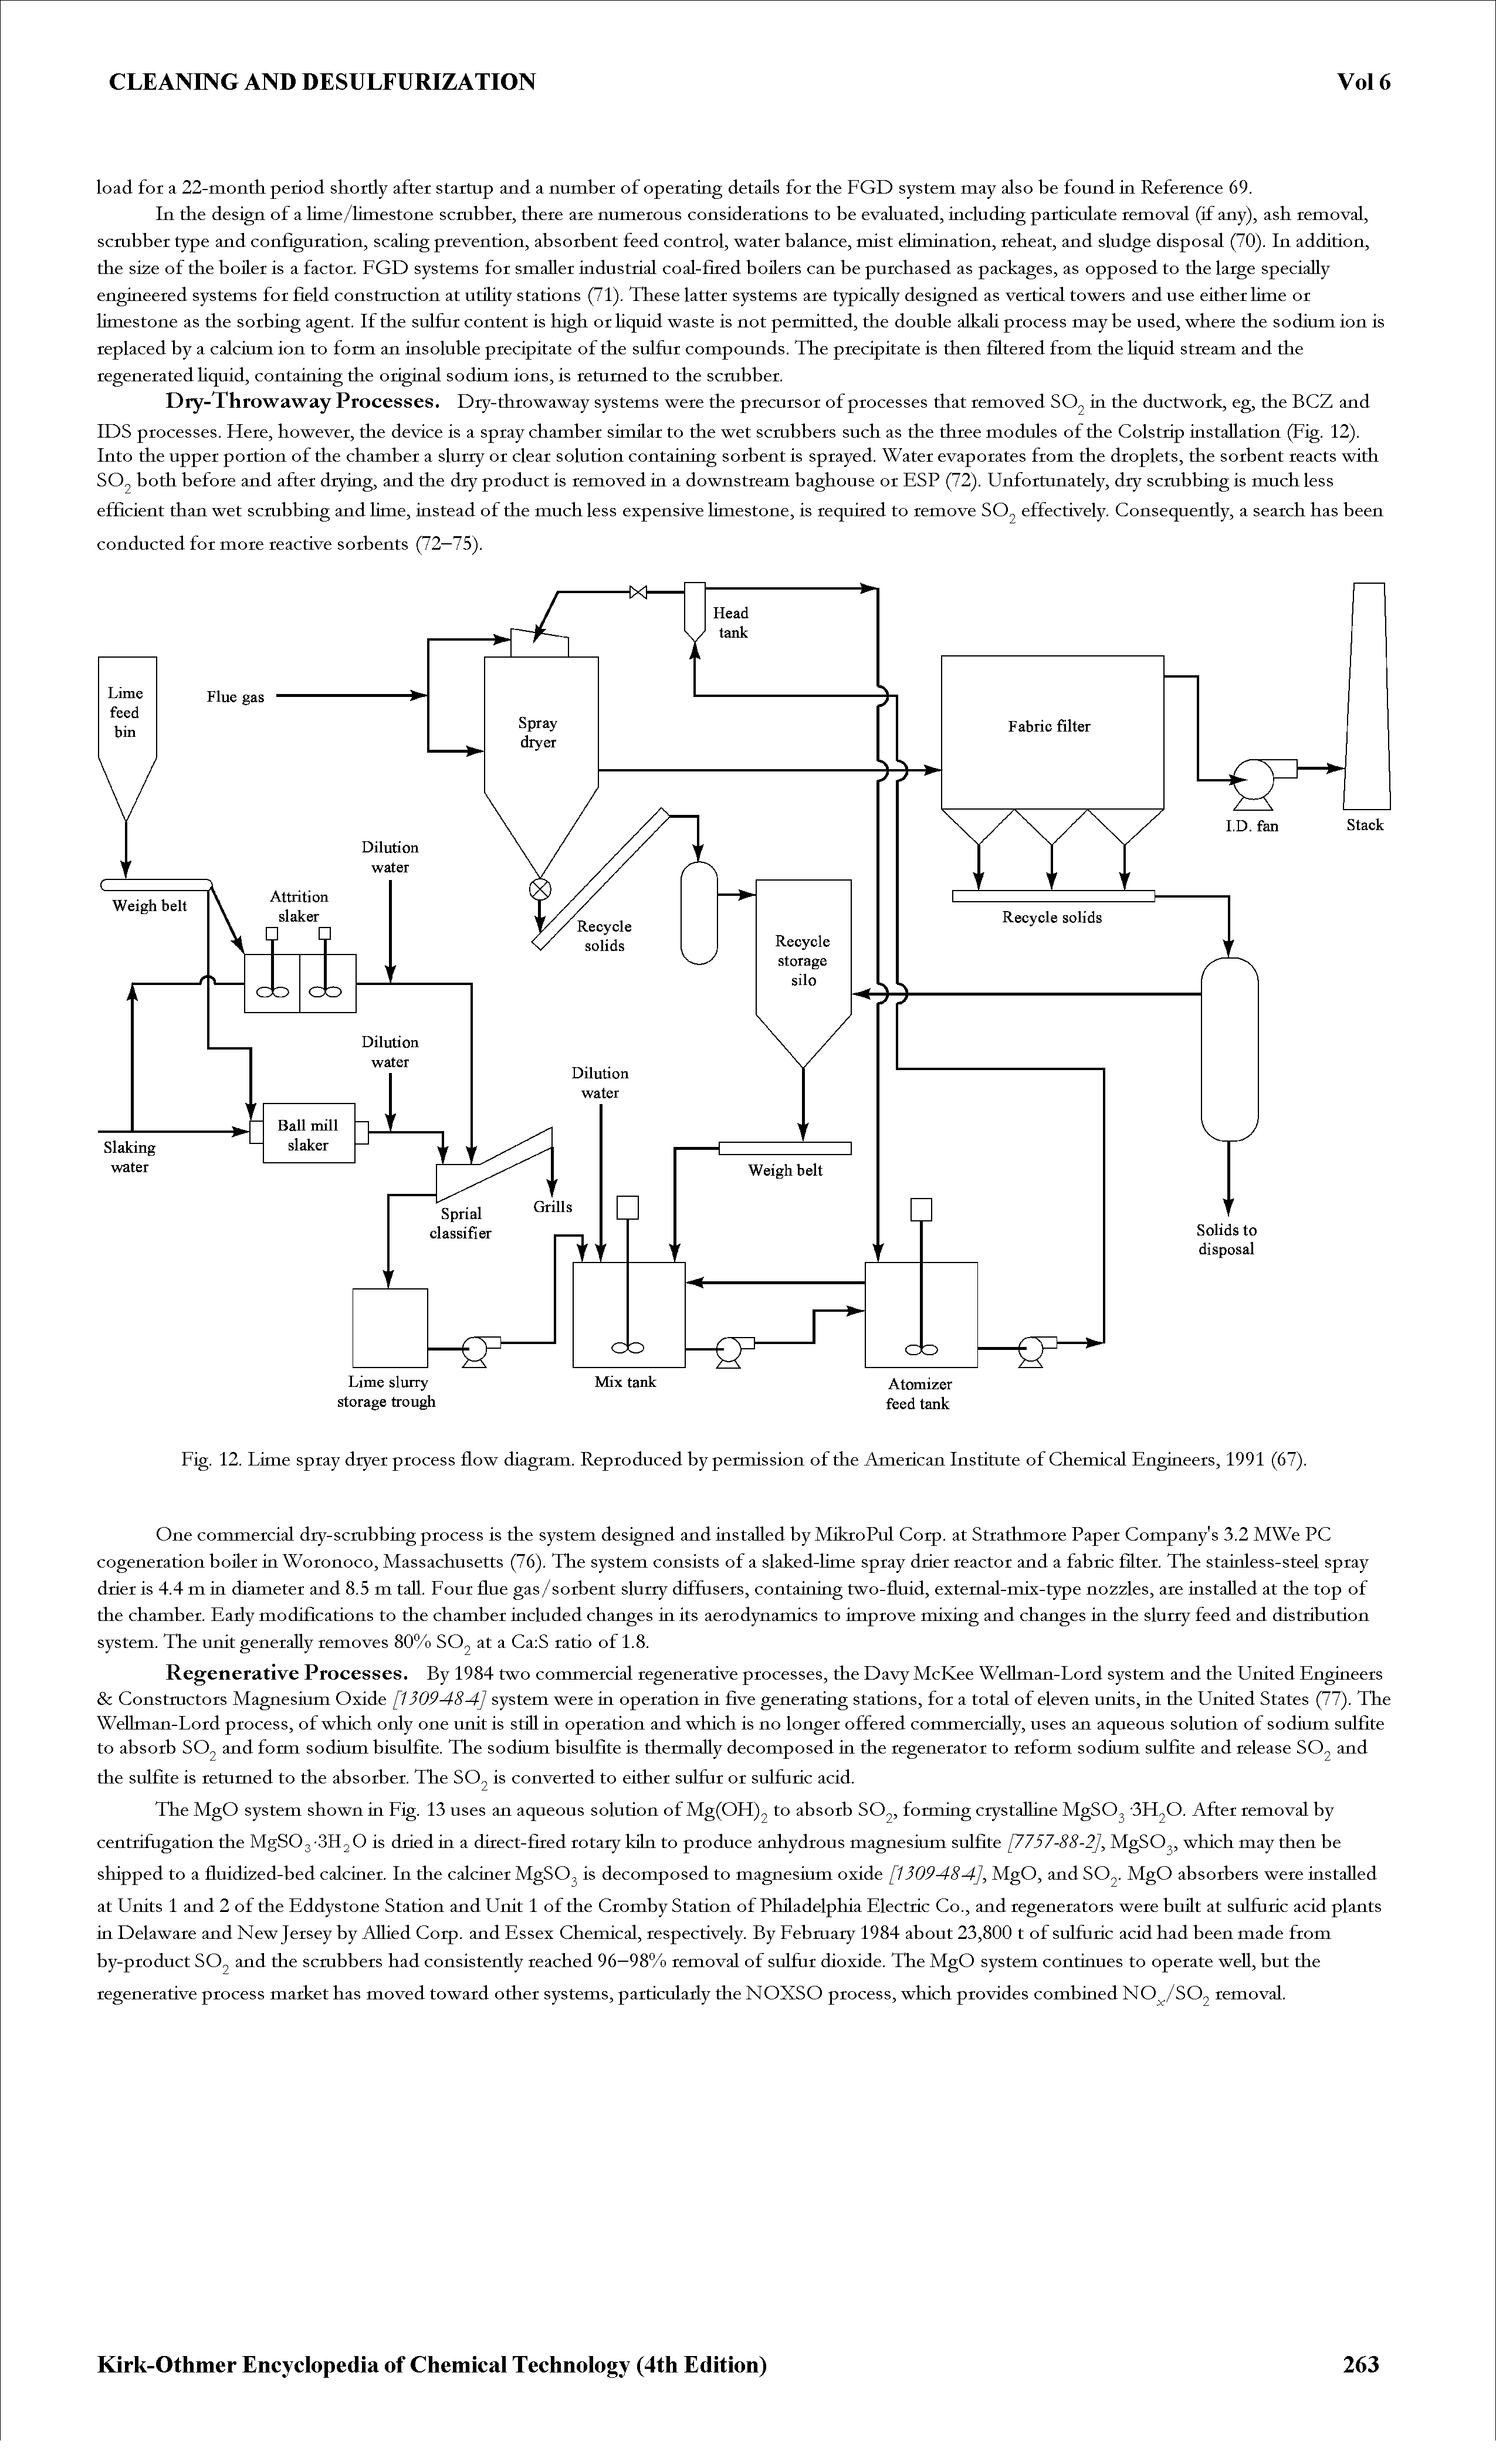 Fig. 12. Lime spray dryer process flow diagram. Reproduced by permission of the American Institute of Chemical Engineers, 1991 (67).